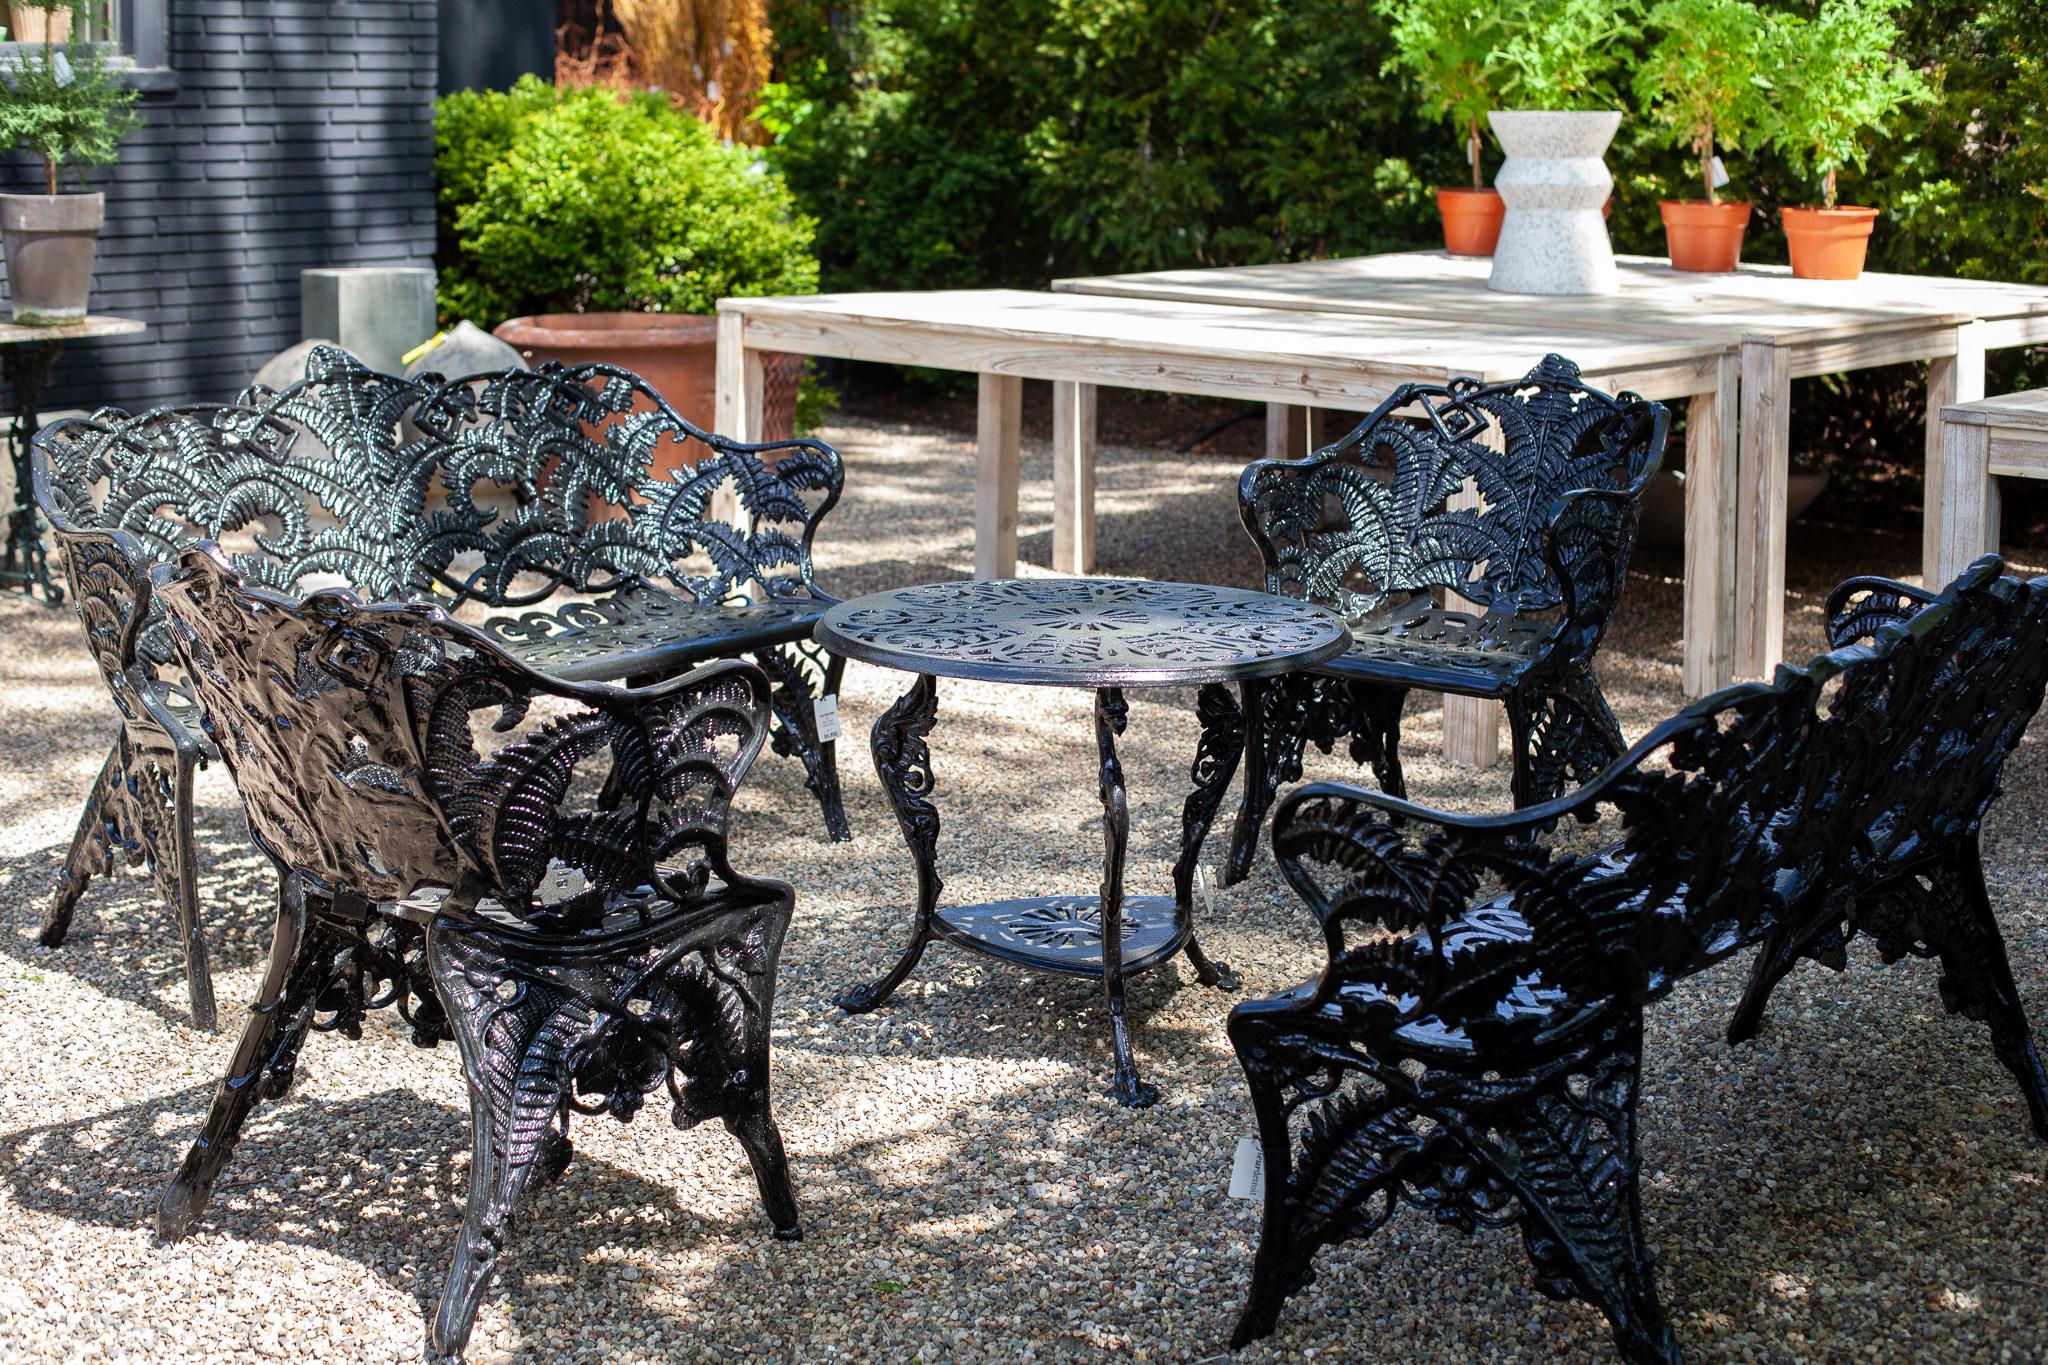 Harkening back from the Age of Innocence of the Edwardian Era, these chairs will add a layer of sophistication to any garden space. Original castings with a fresh coat of black paint will modernize a space with a fresh take on old-world